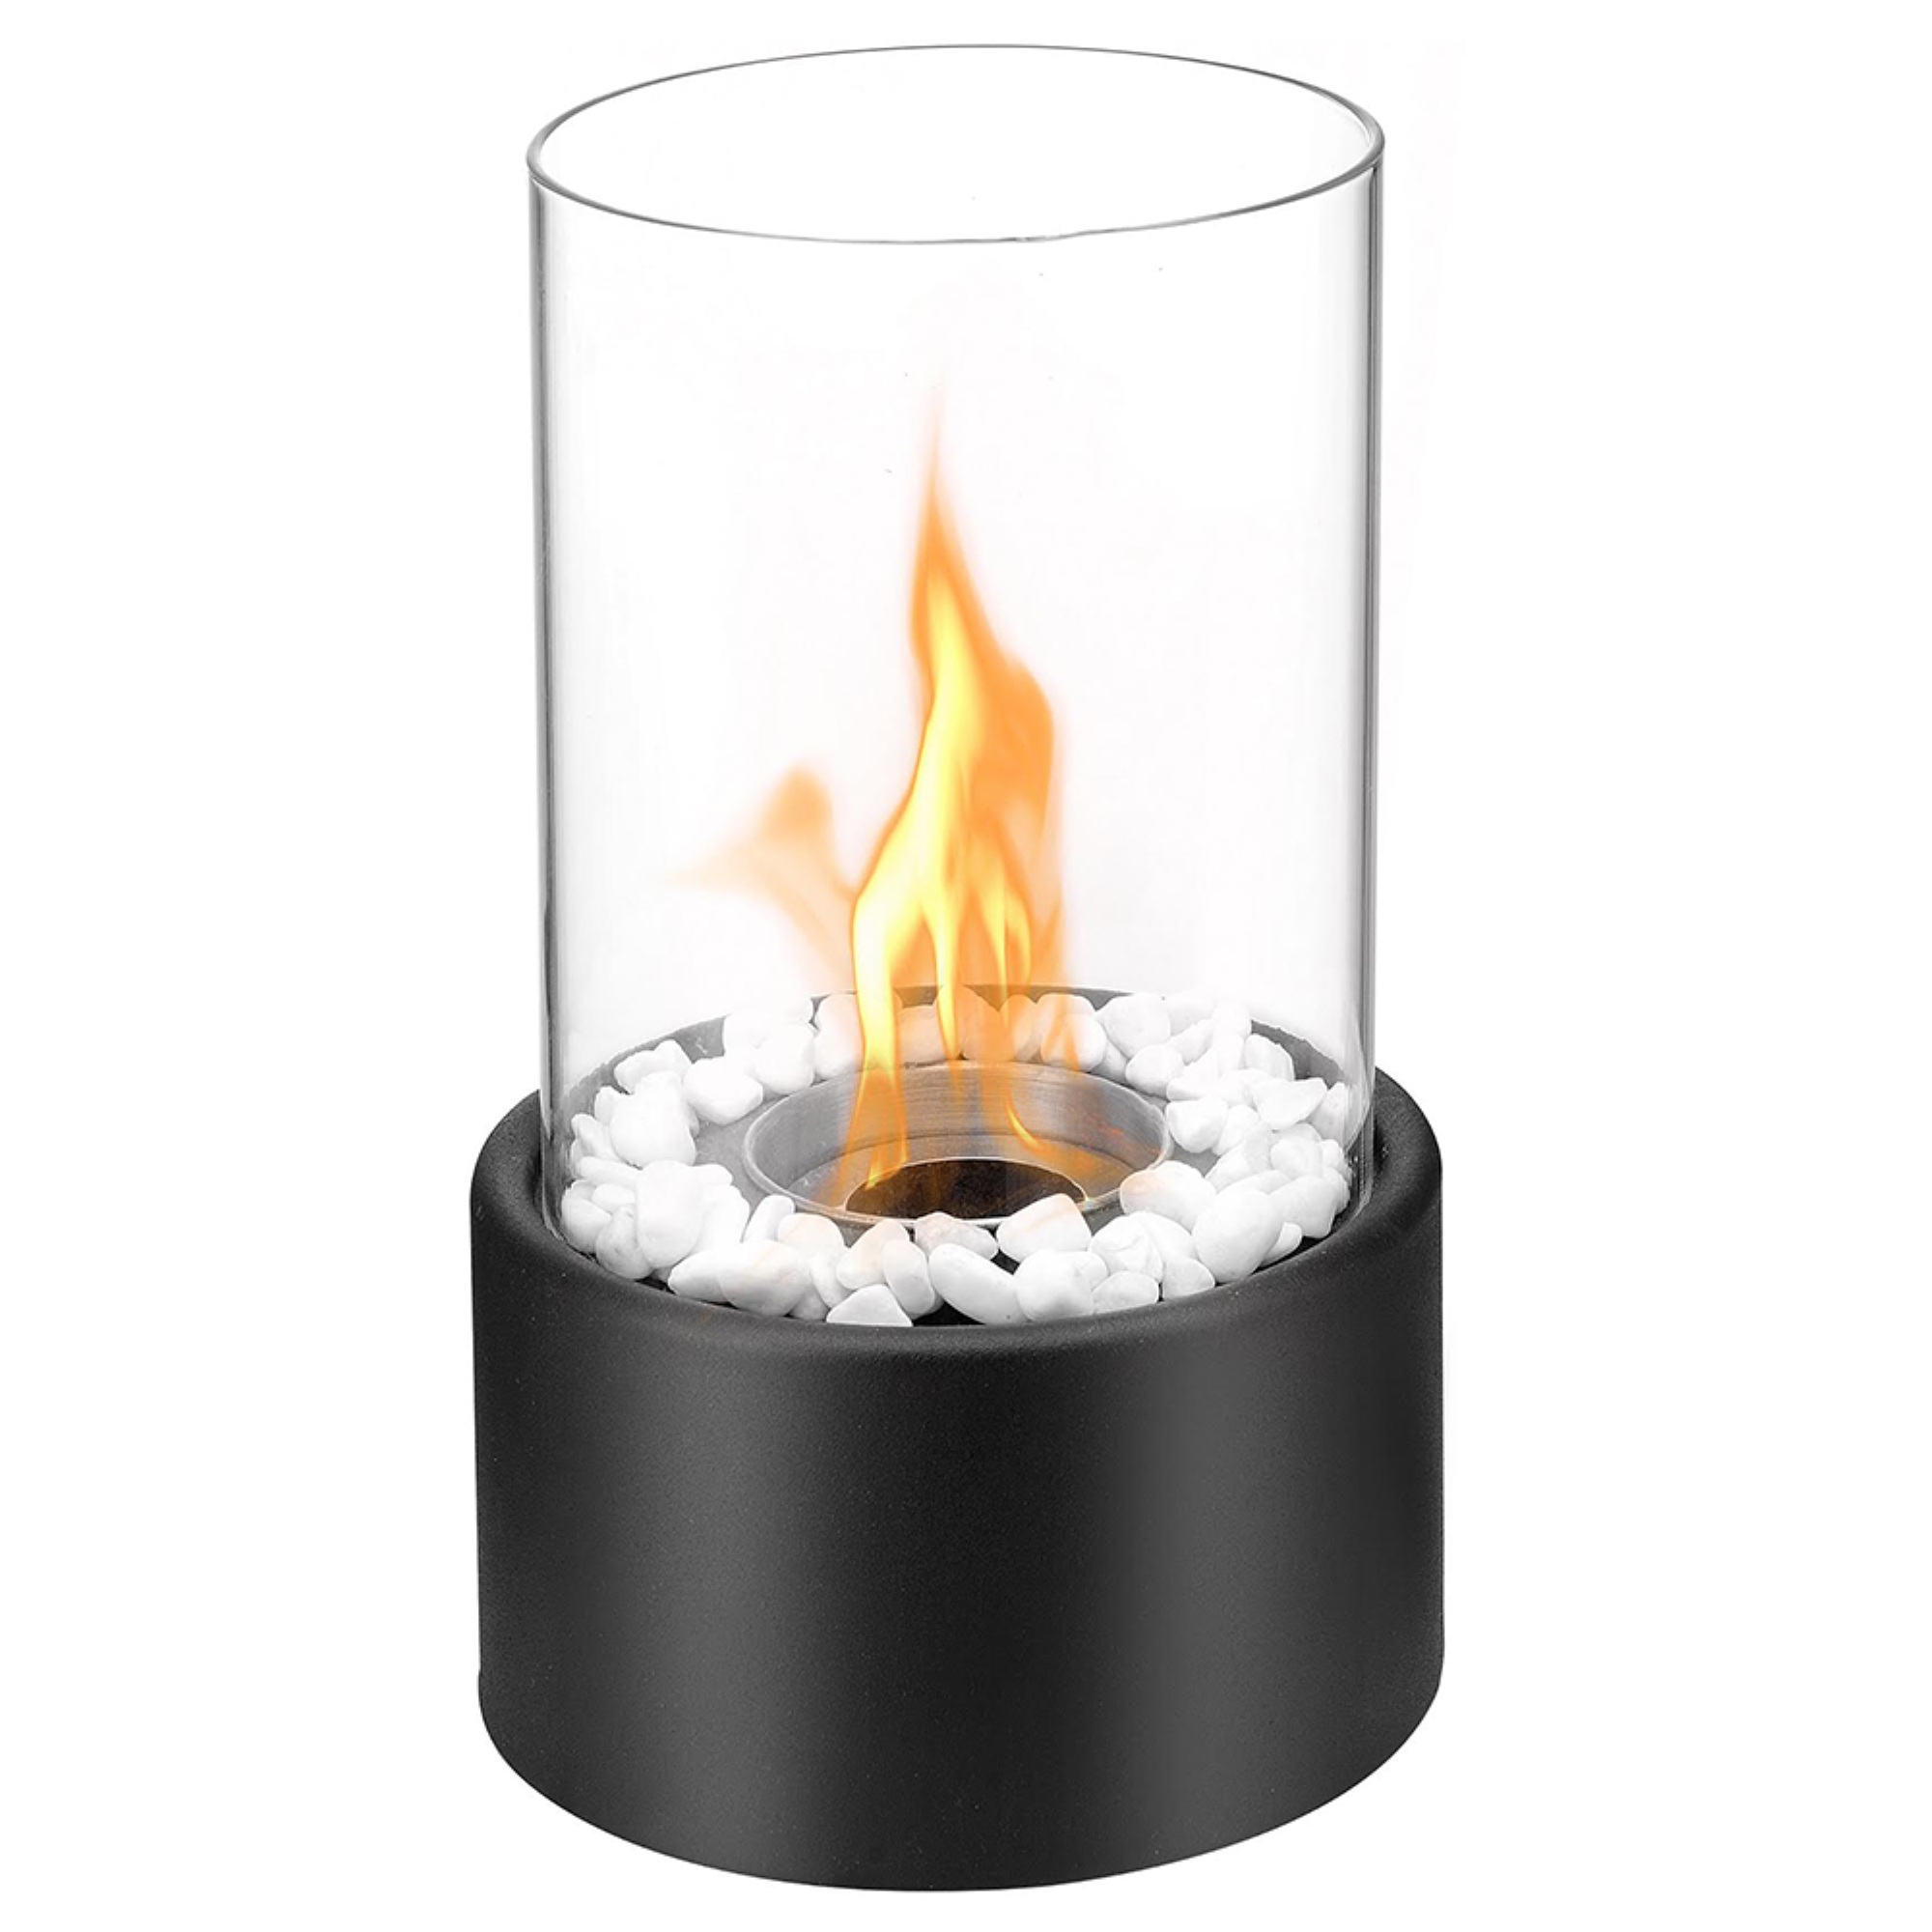 Regal Flame Eden Ventless Indoor Outdoor Fire Pit Tabletop Portable Fire Bowl Pot Bio Ethanol Fireplace in Black - Realistic Cl